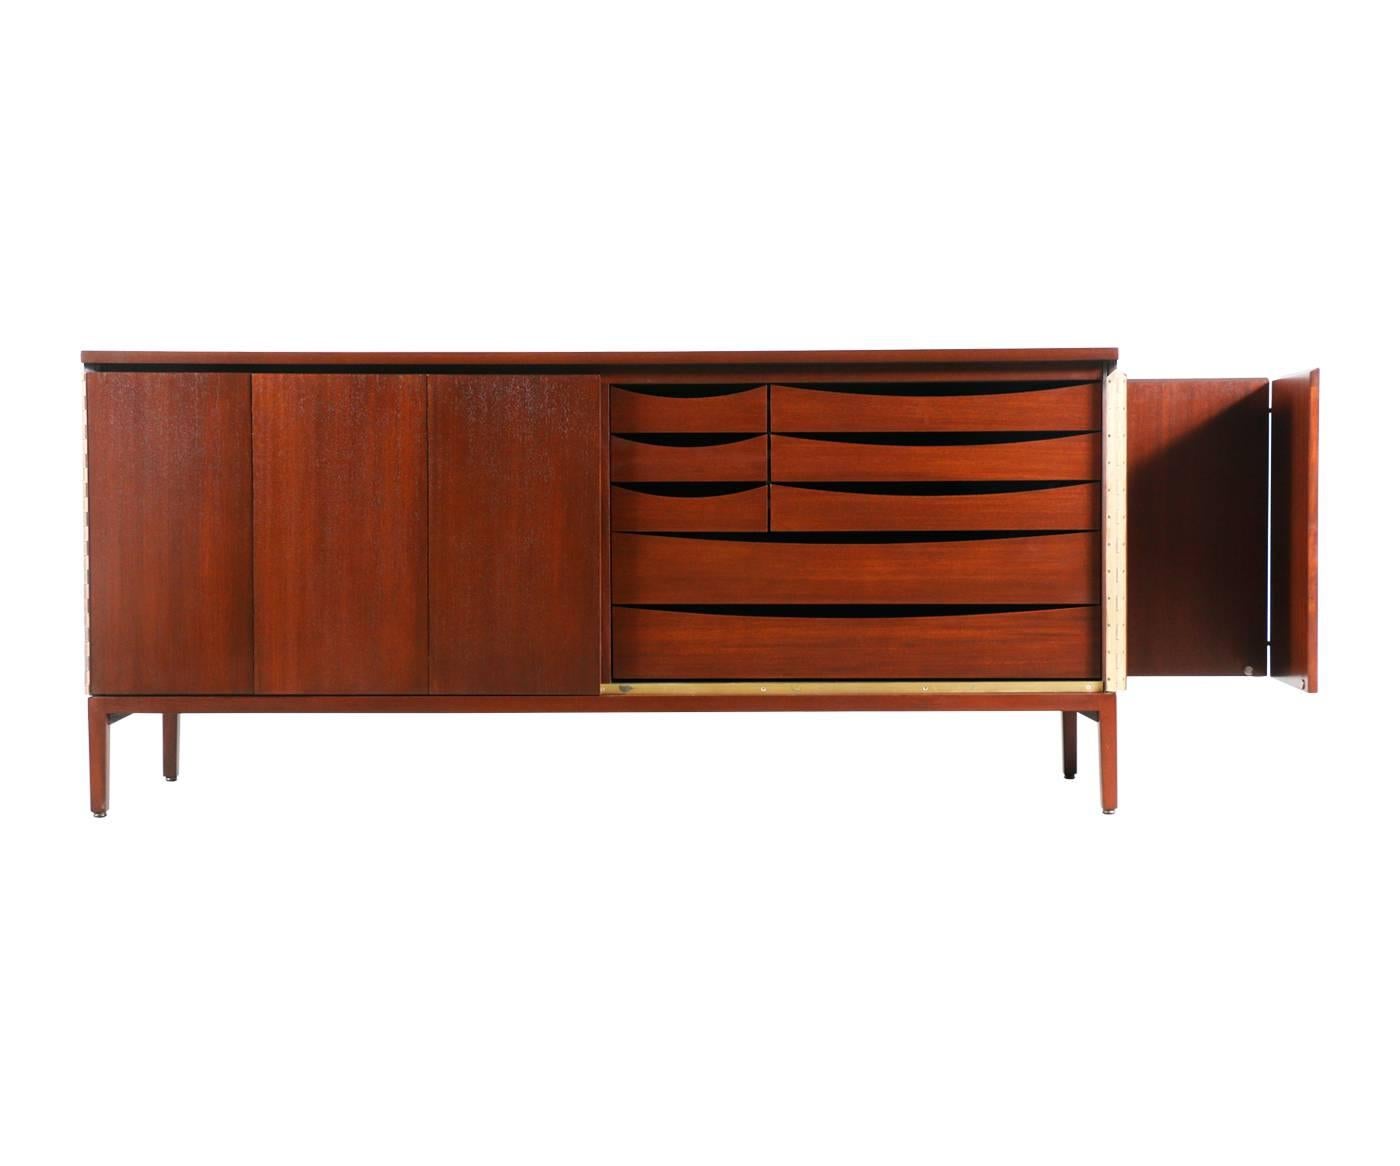 Designer: Paul McCobb.
Manufacturer: Calvin Group “Irwin Collection.”
Period/Style: Mid-Century Modern.
Country: United States.
Date: 1950s.

Dimensions: 32.25″ H x 71.25″ L x 19.25″ W.
Materials: Mahogany, brass.
Condition: Excellent newly